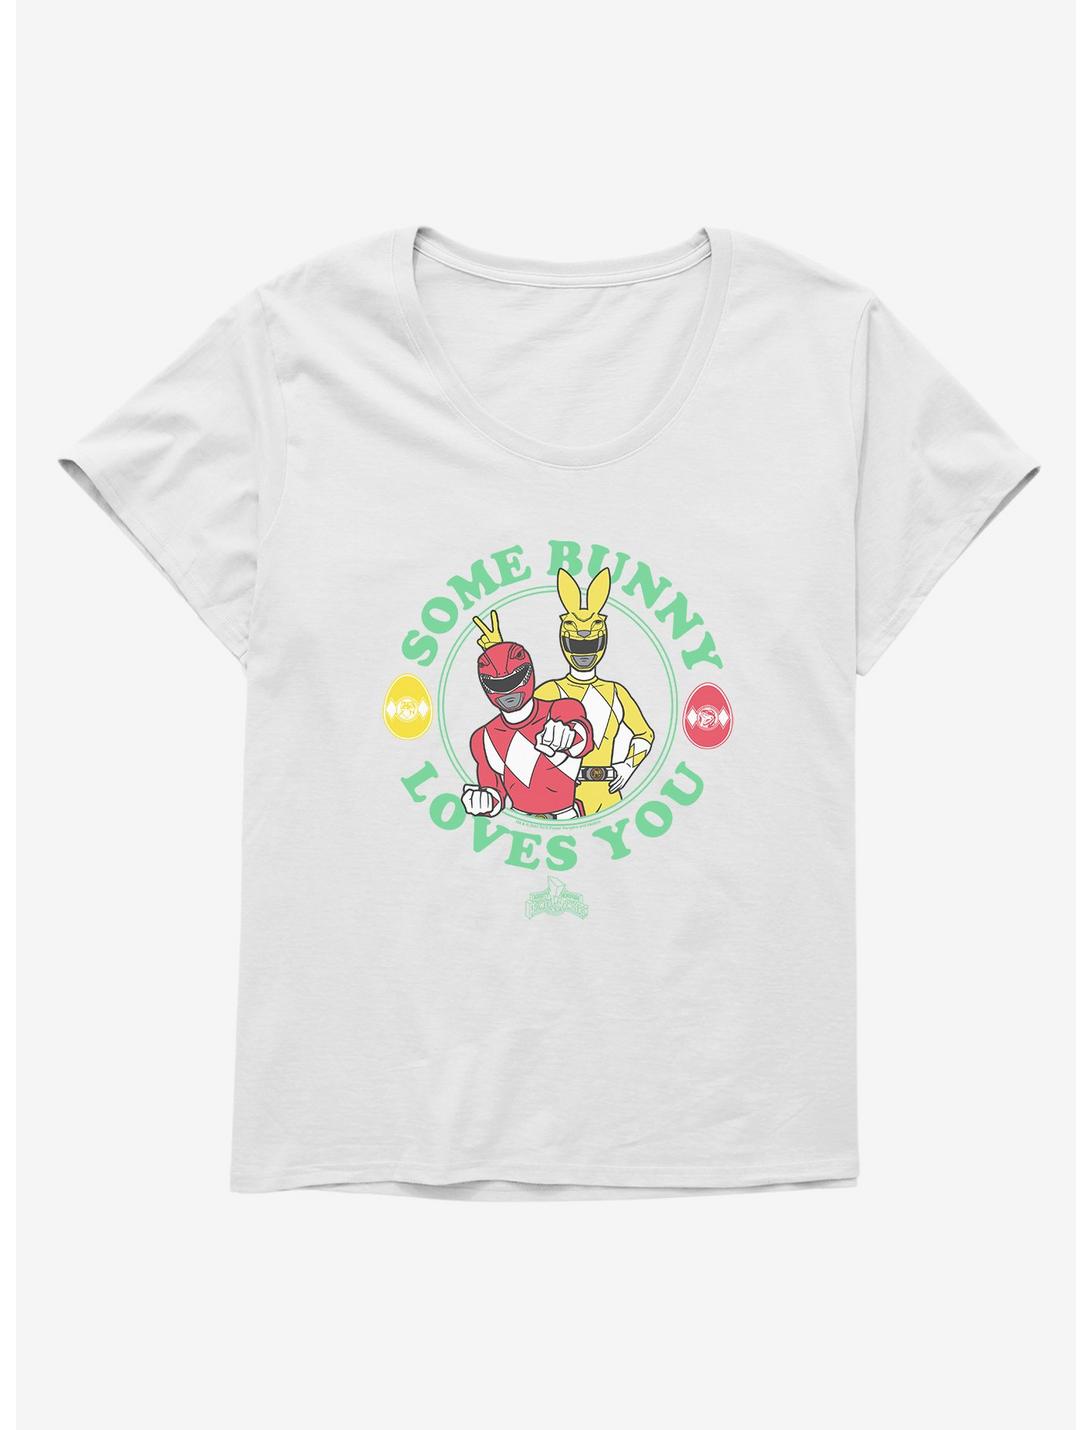 Mighty Morphin Power Rangers Some Bunny Loves You Girls T-Shirt Plus Size, WHITE, hi-res